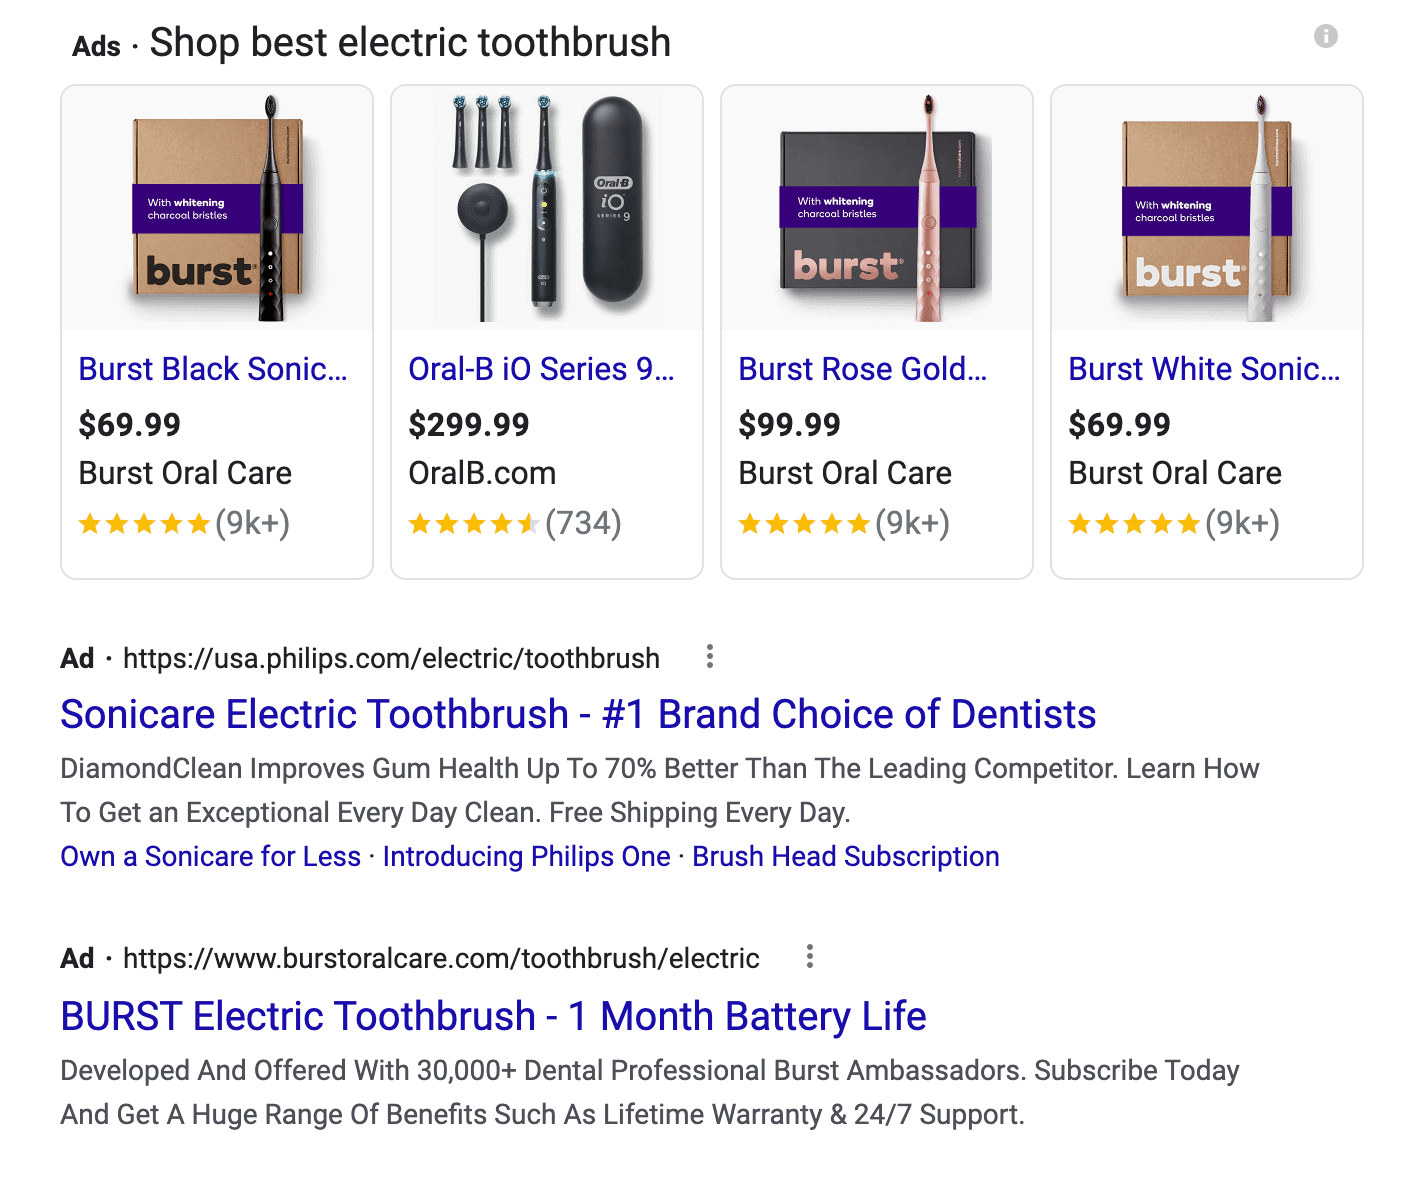 Search ads for electric toothbrushes